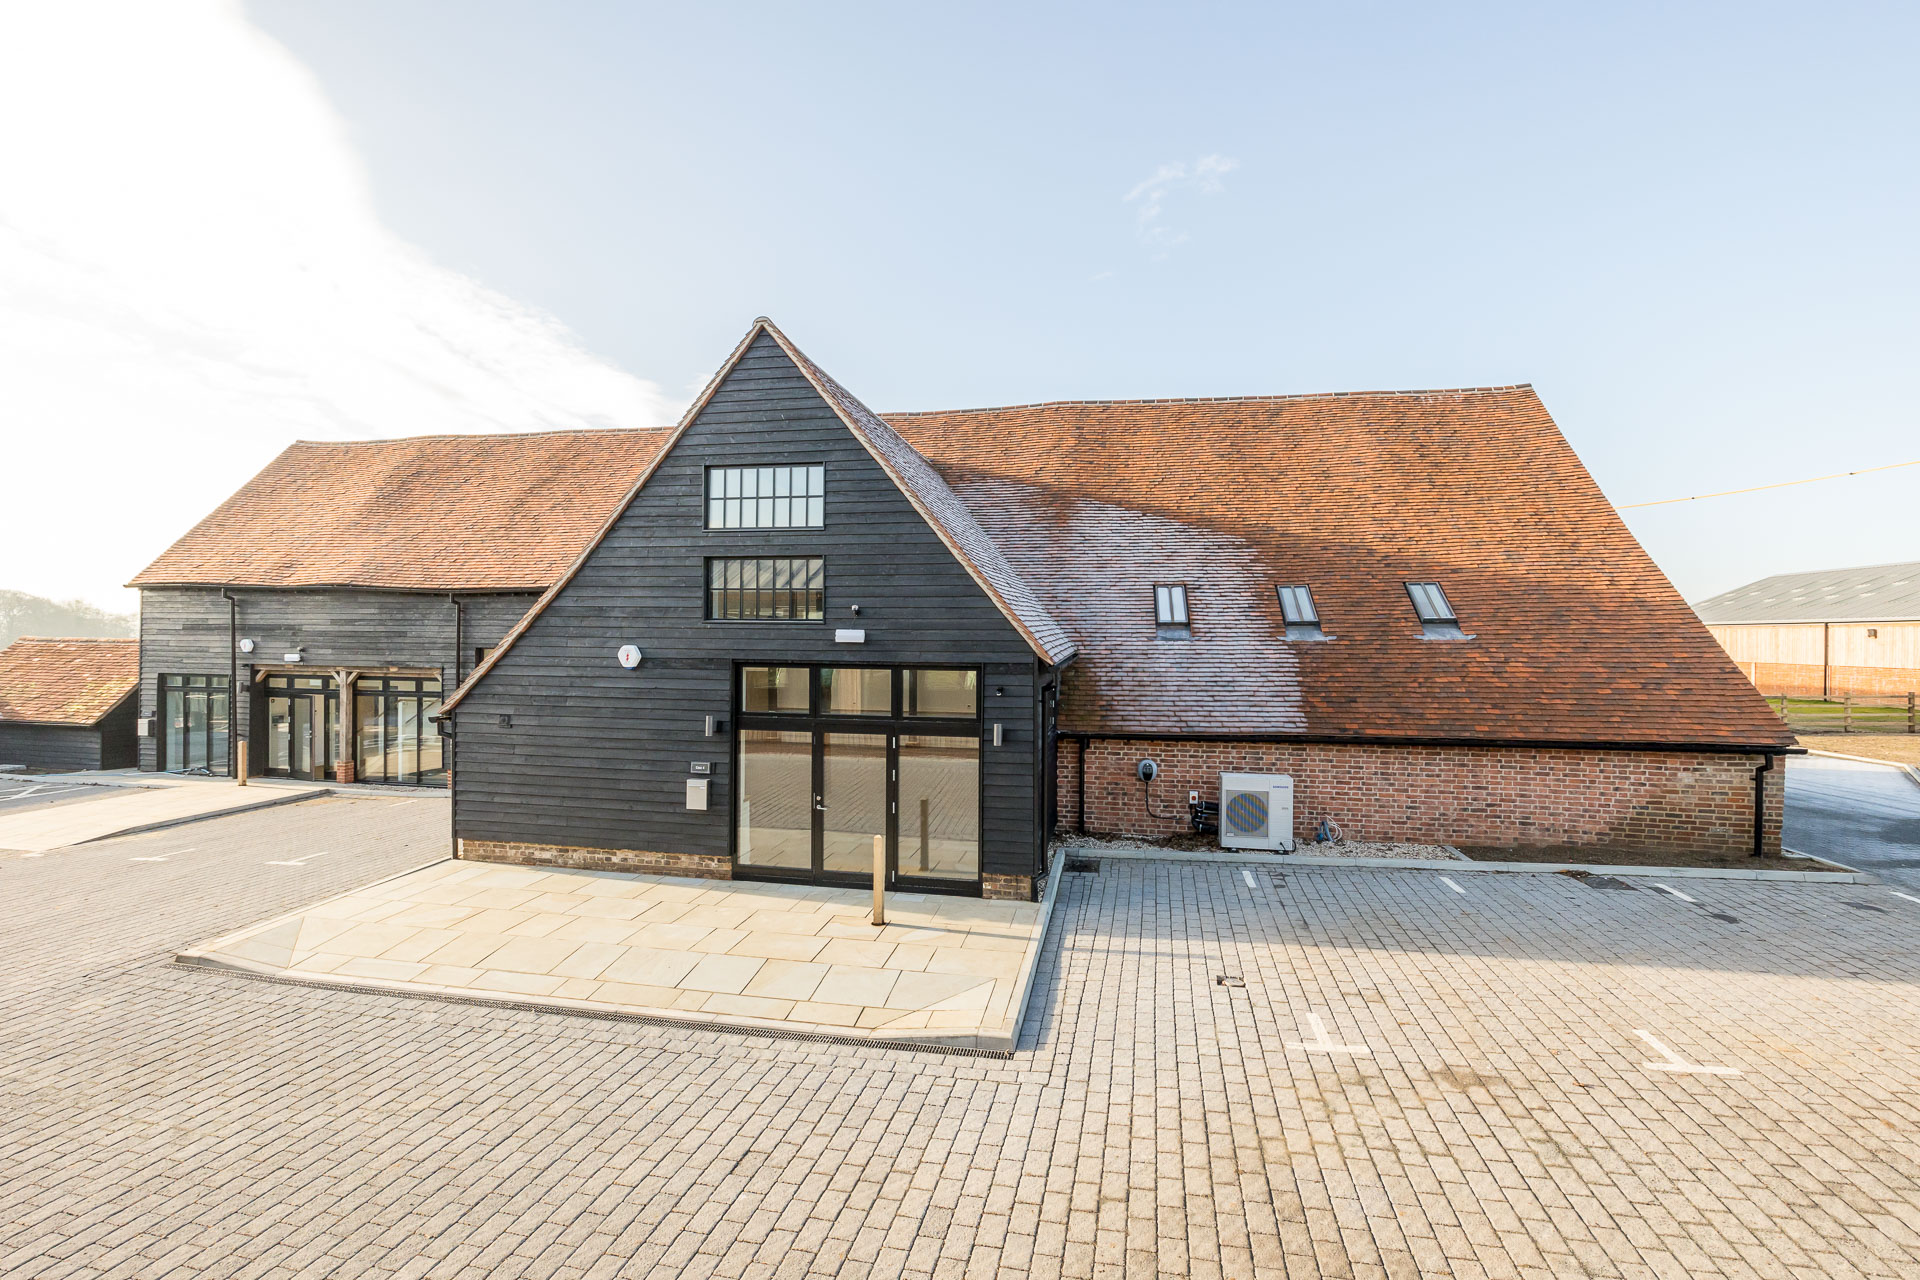 External view of the refurbished Barn D with paved parking in front at Hard to Find Farm.